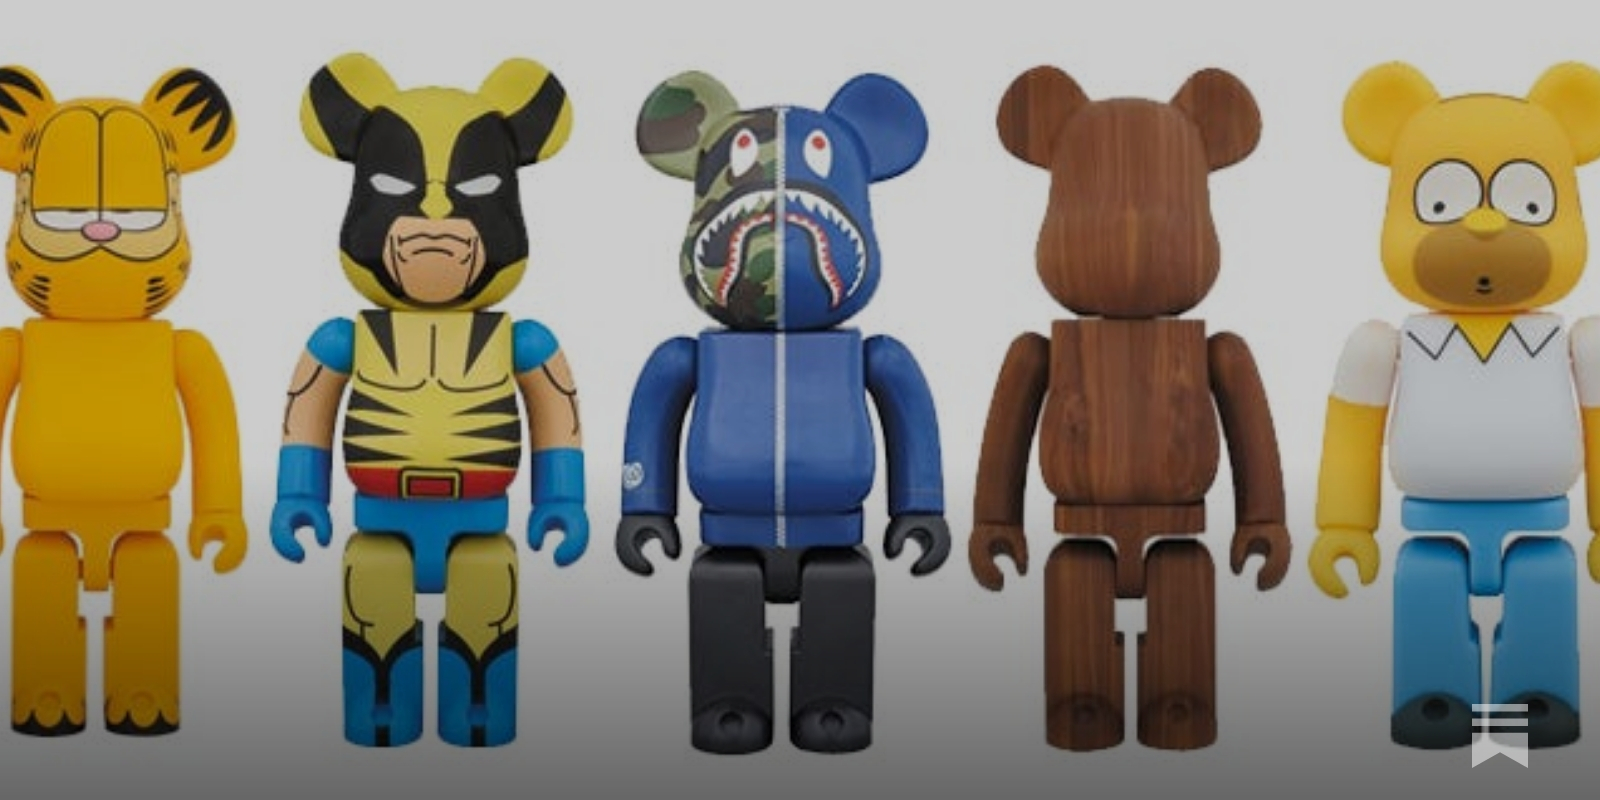 Are Bearbrick Figures Good Investment For Your Money?